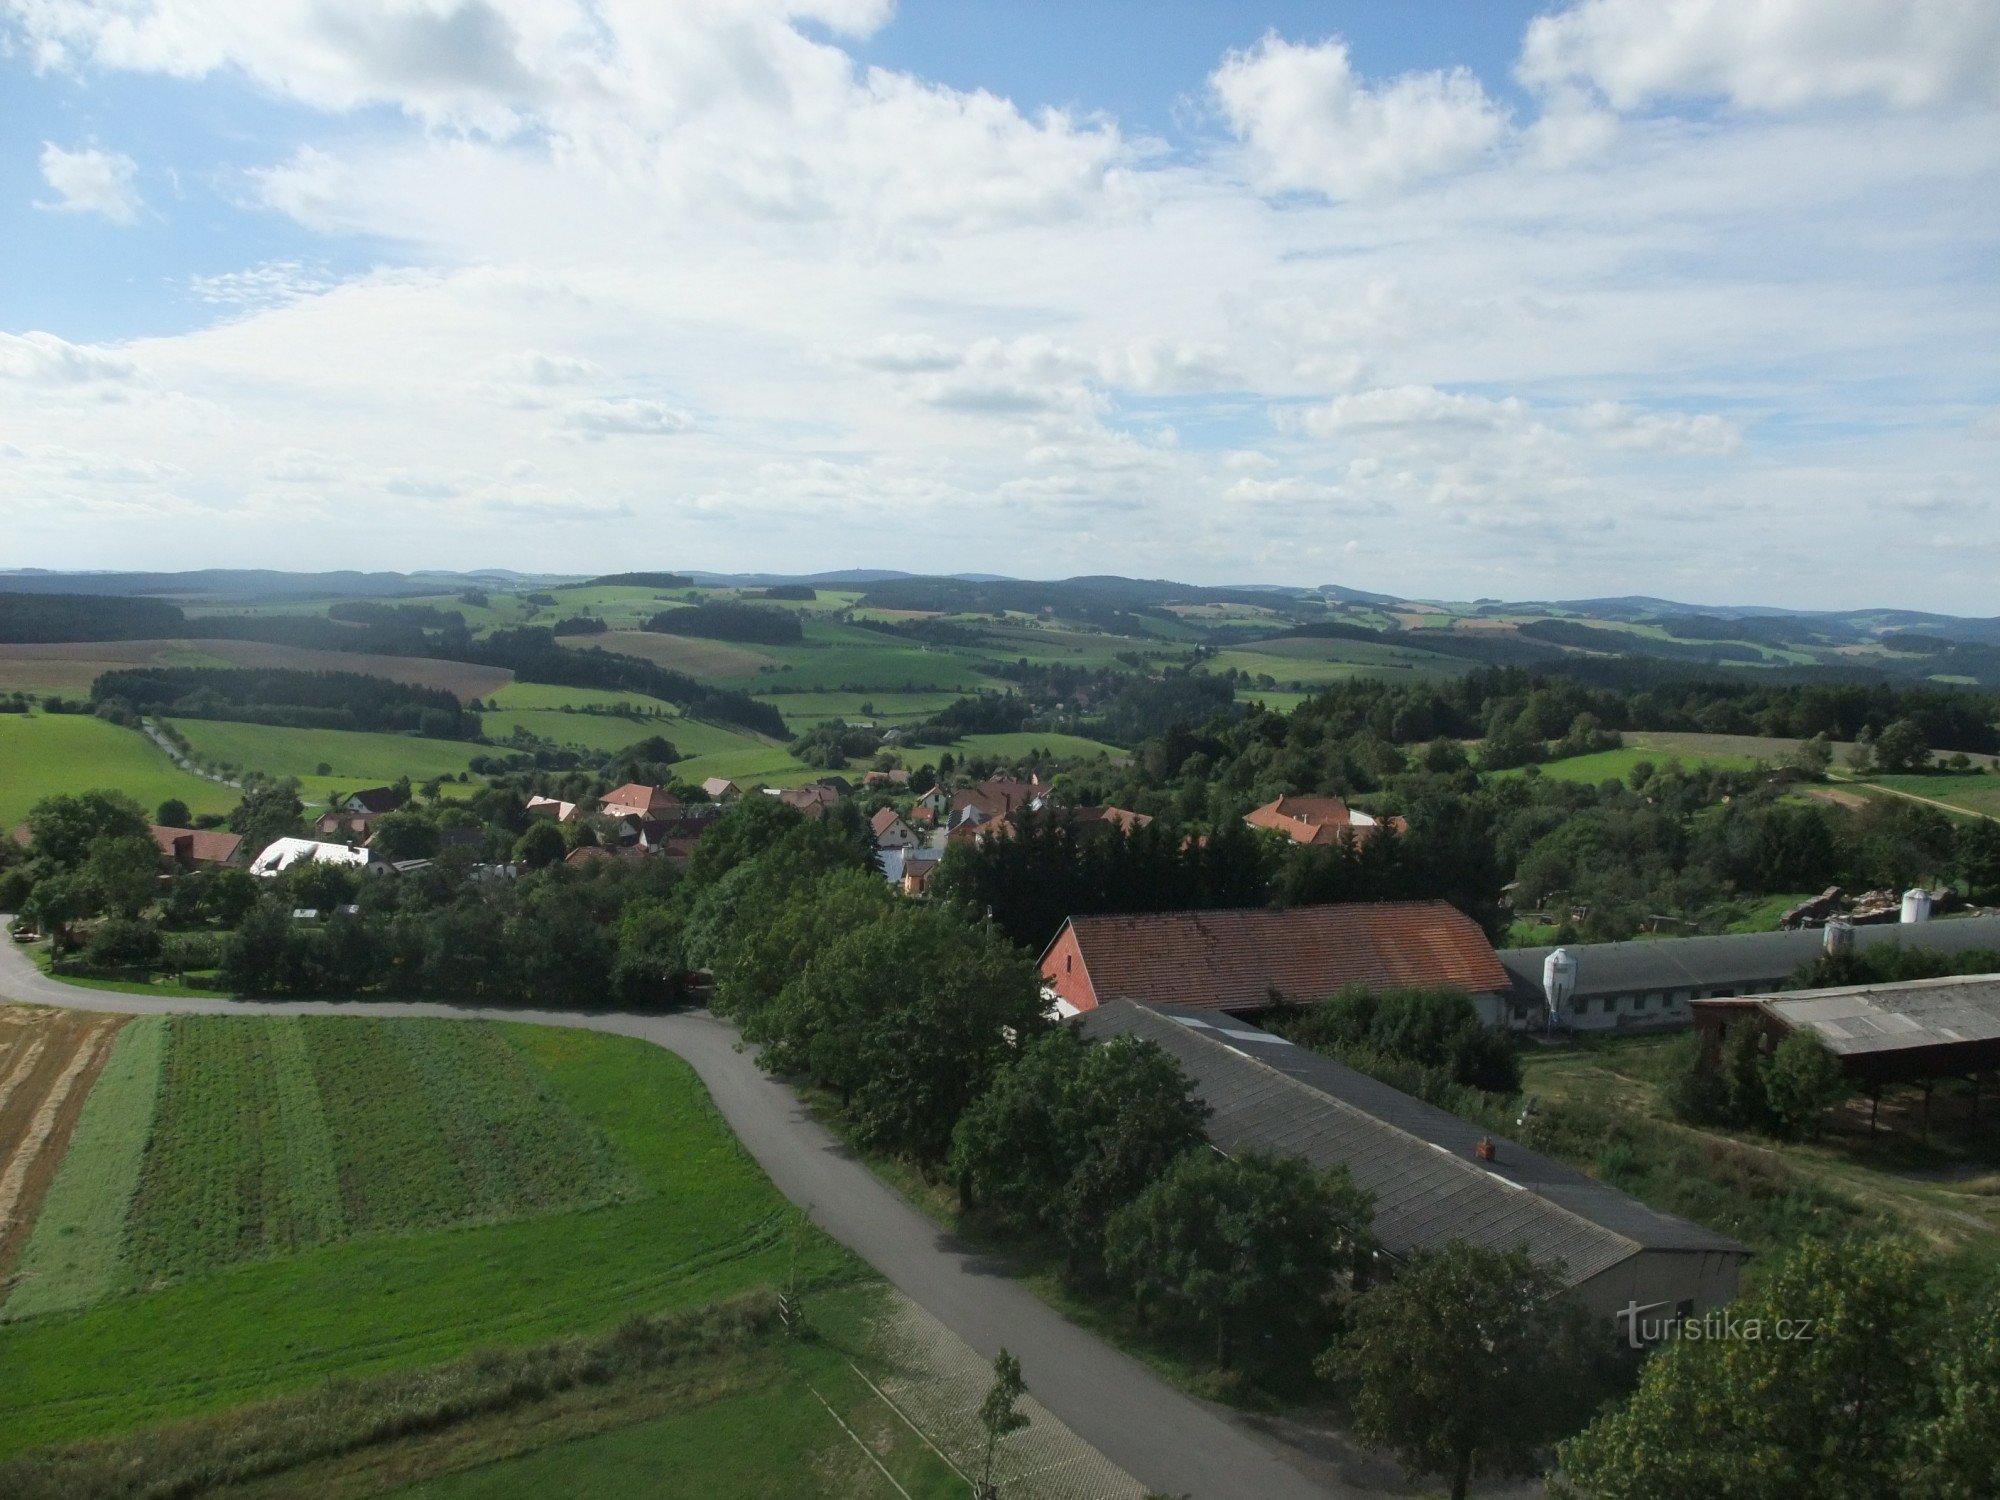 The view from the Karasín observation tower